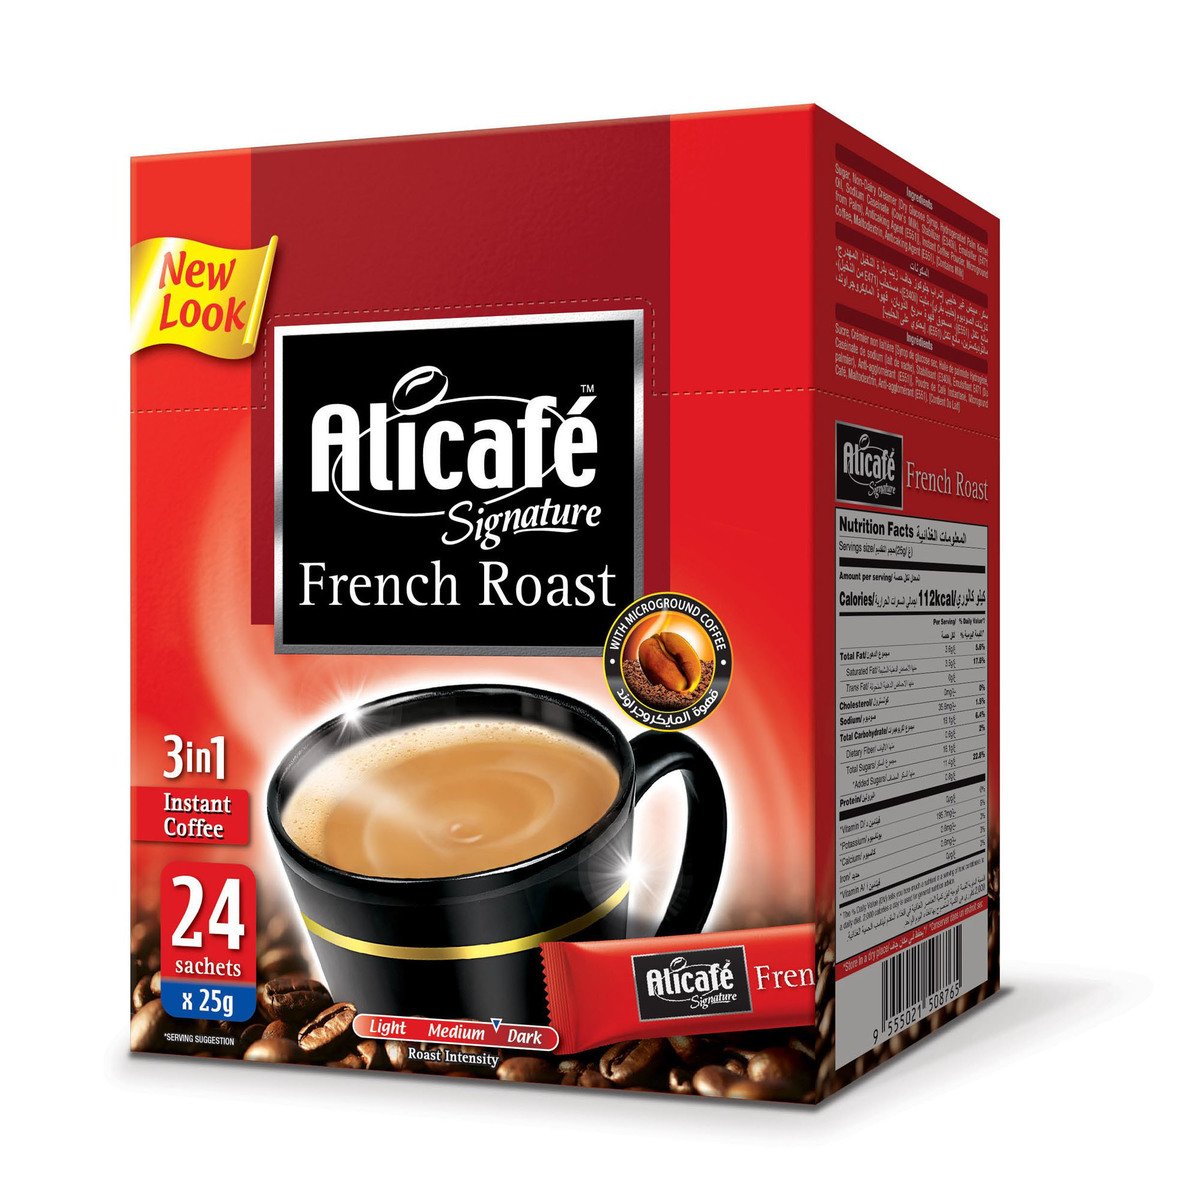 Alicafe Signature 3in1 French Roast 24 x 25 g